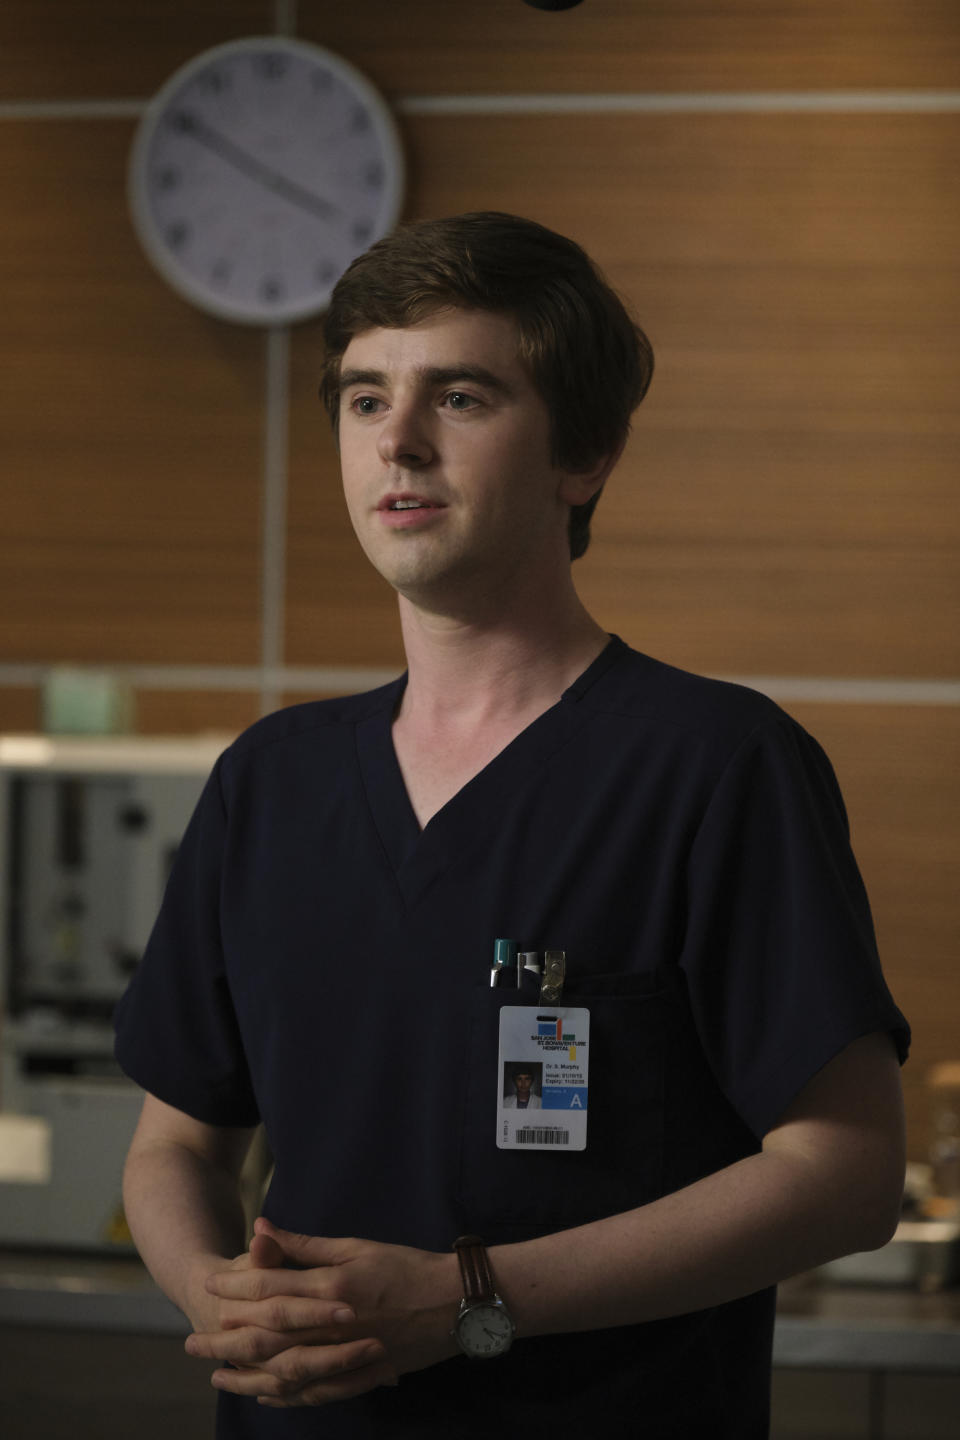 Freddie Highmore plays Shaun, a surgical resident with autism, on The Good Doctor. (Photo: Jeff Weddell via Getty Images)